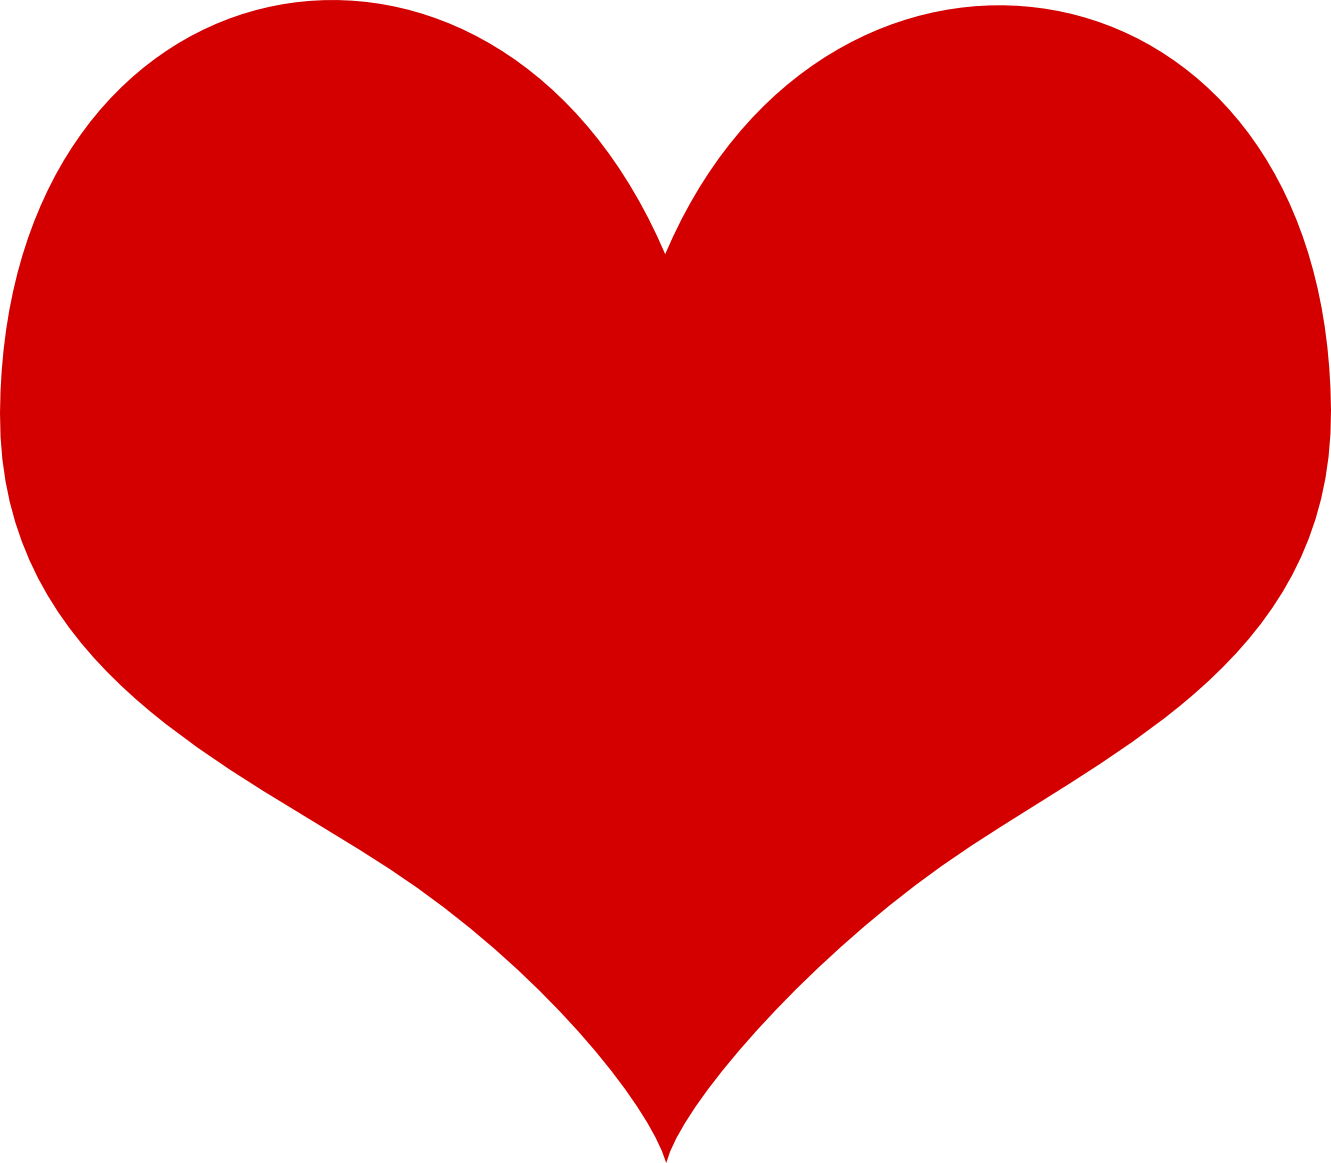 Download Red Heart Transparent HQ PNG Image